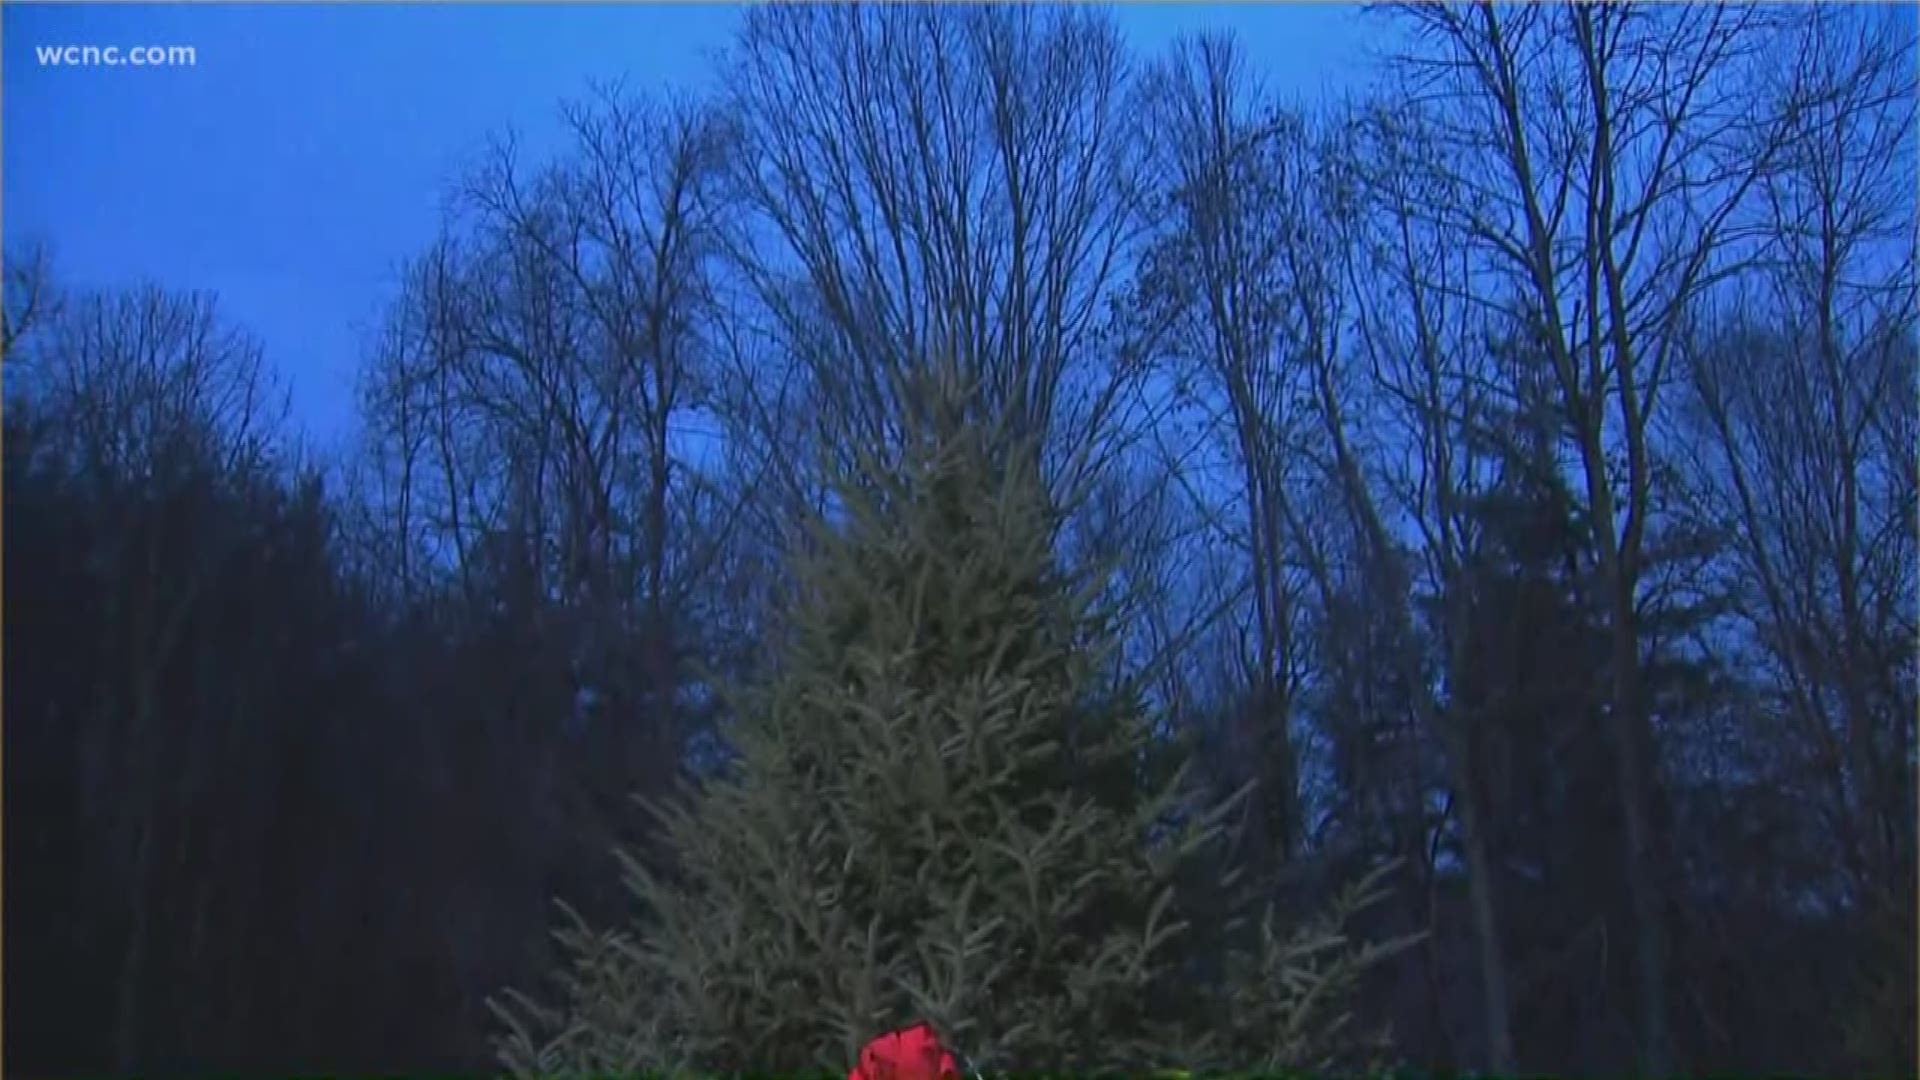 For the 13th time, the White House has chosen a Christmas tree from North Carolina.